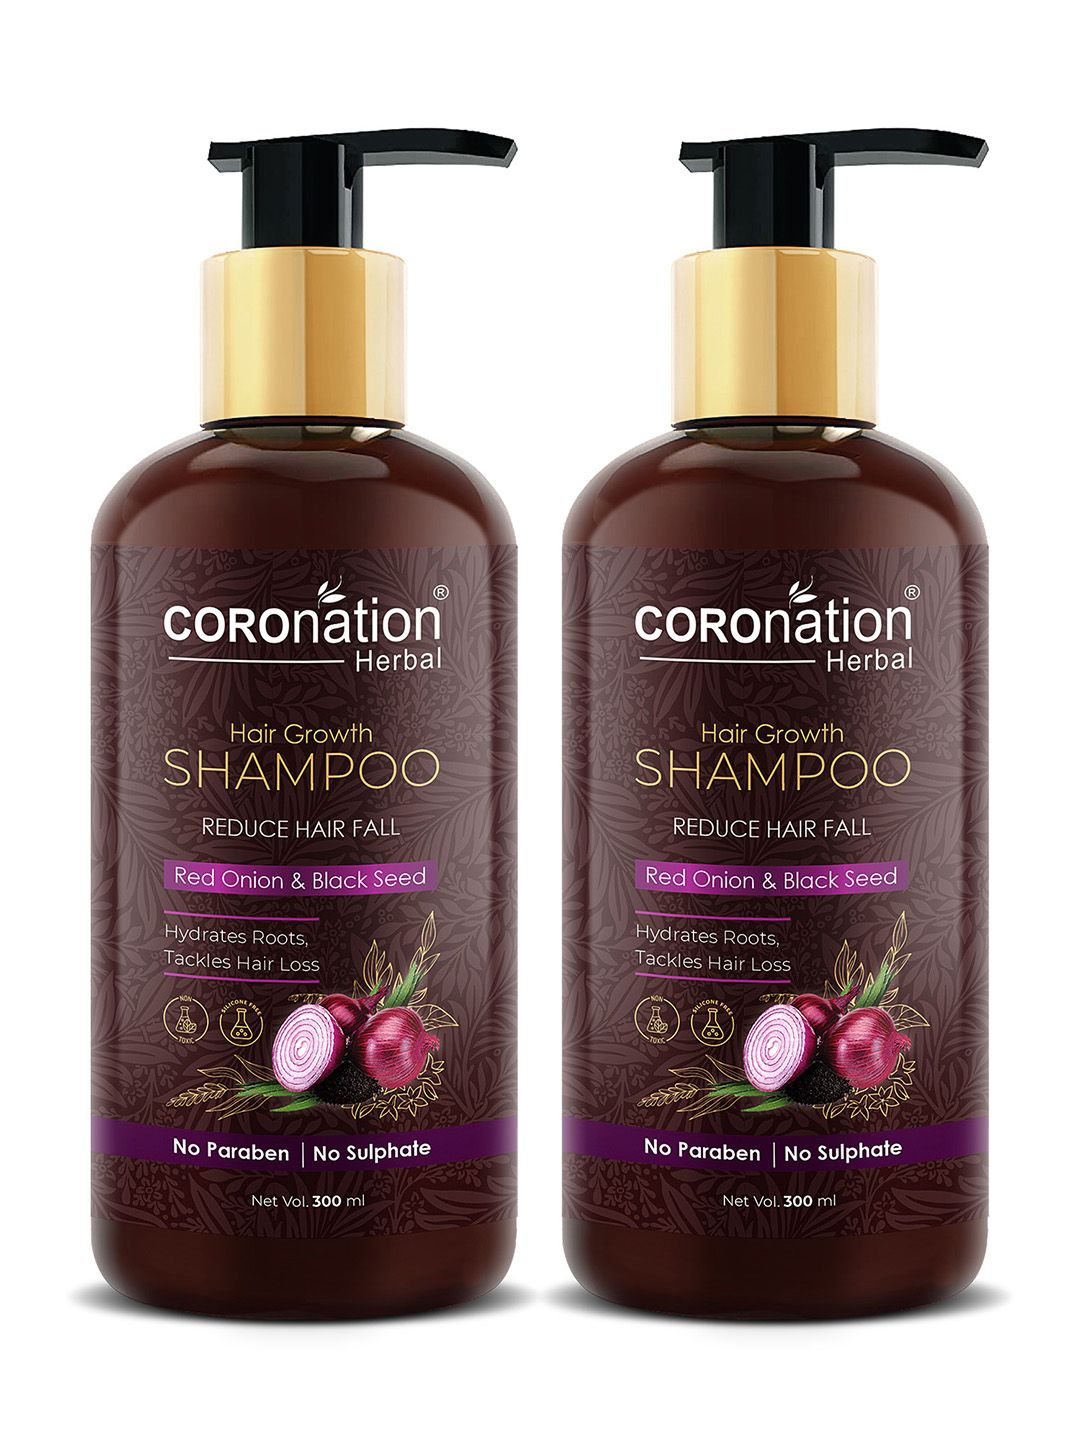 COROnation Herbal Set of 2 Red Onion & Black Seed Hair Growth Shampoo 300 ml Each Price in India